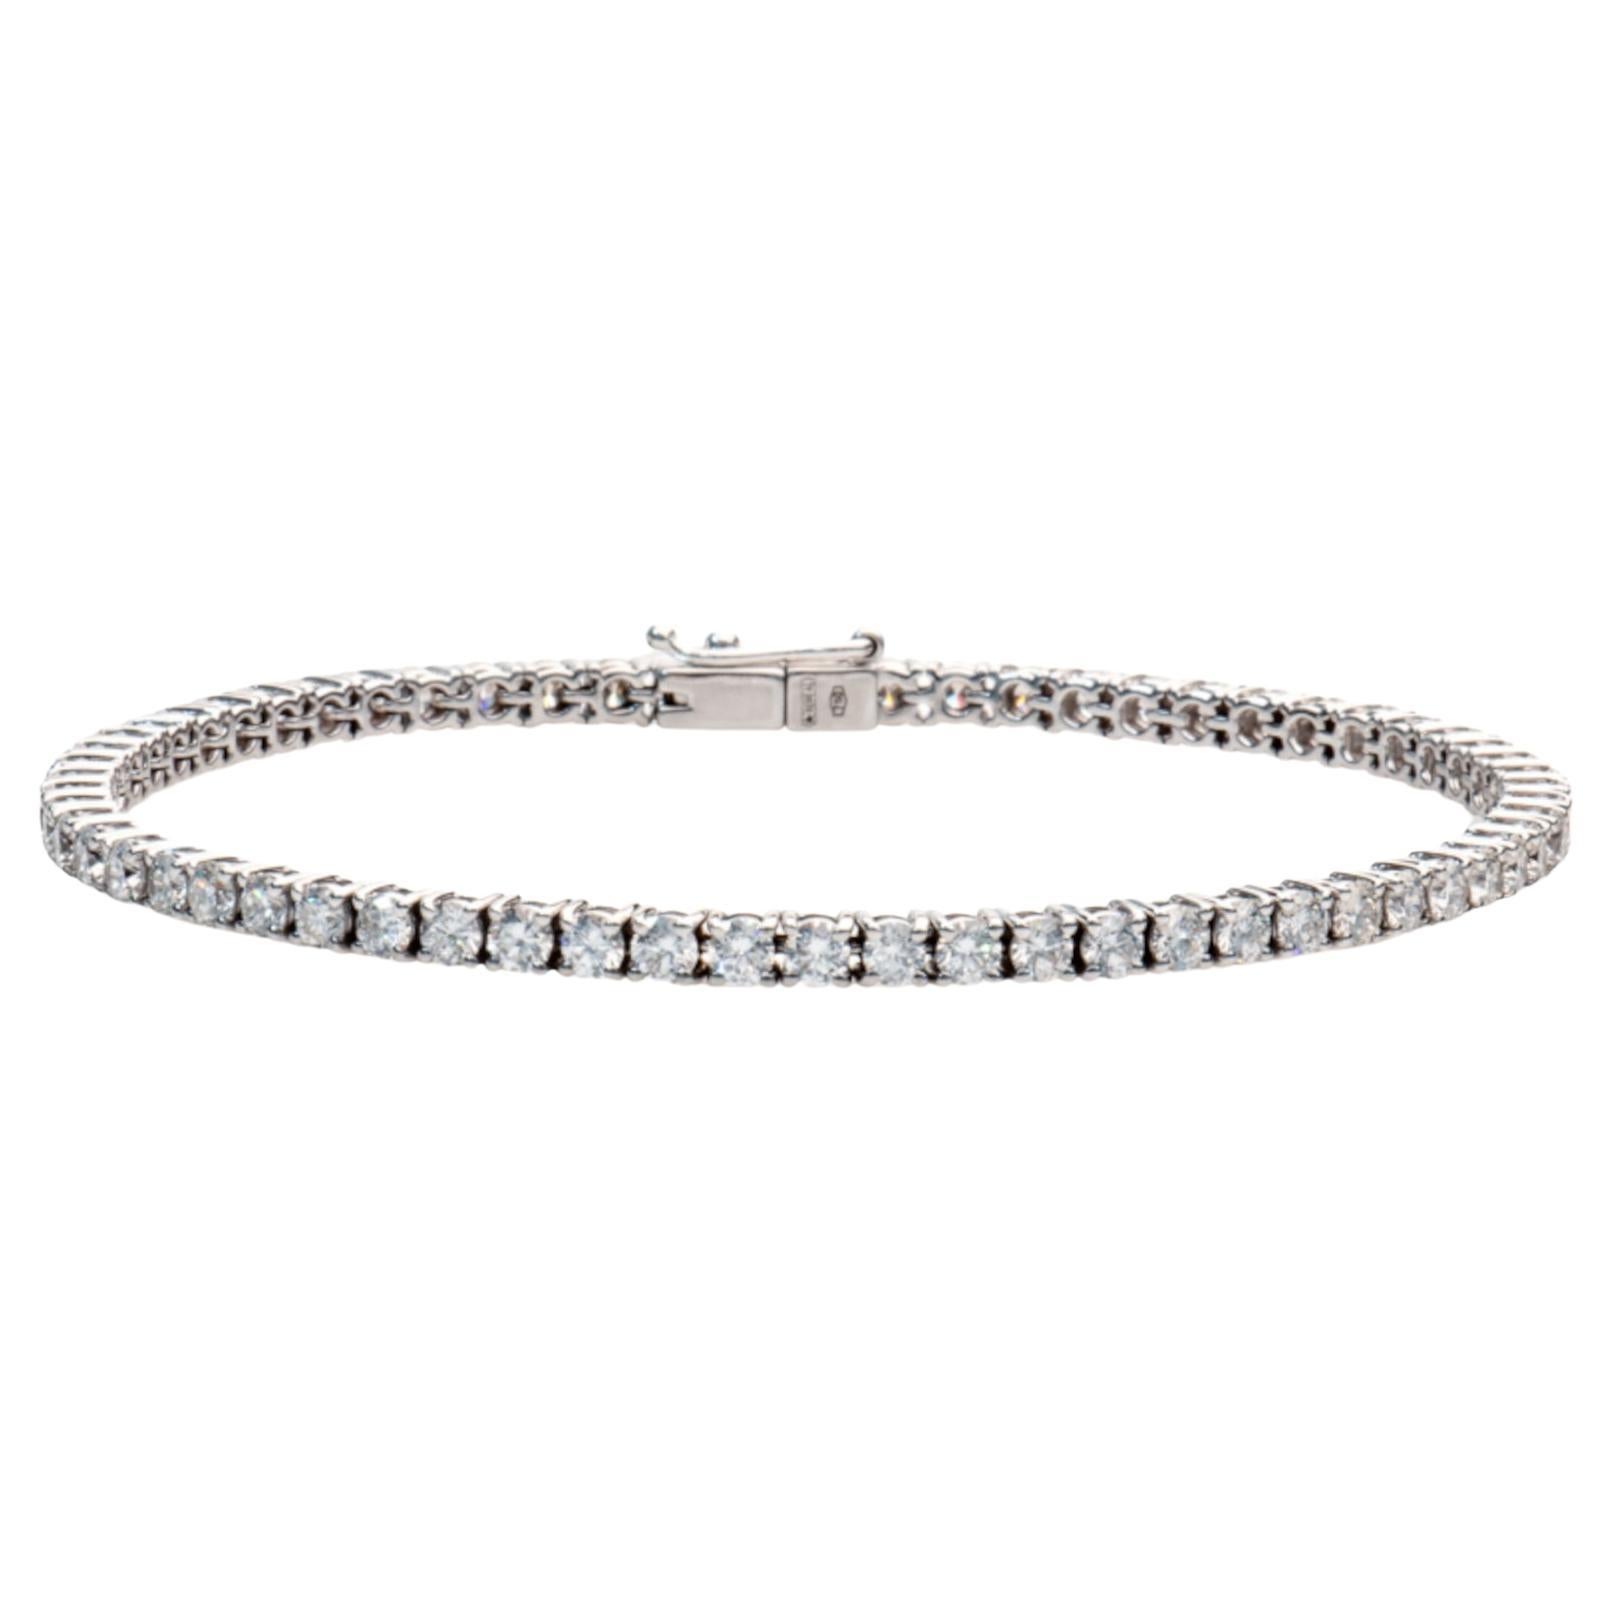 5.70 Carat F Color VS Clarity Made In Italy 18K White Gold Tennis Bracelet For Sale